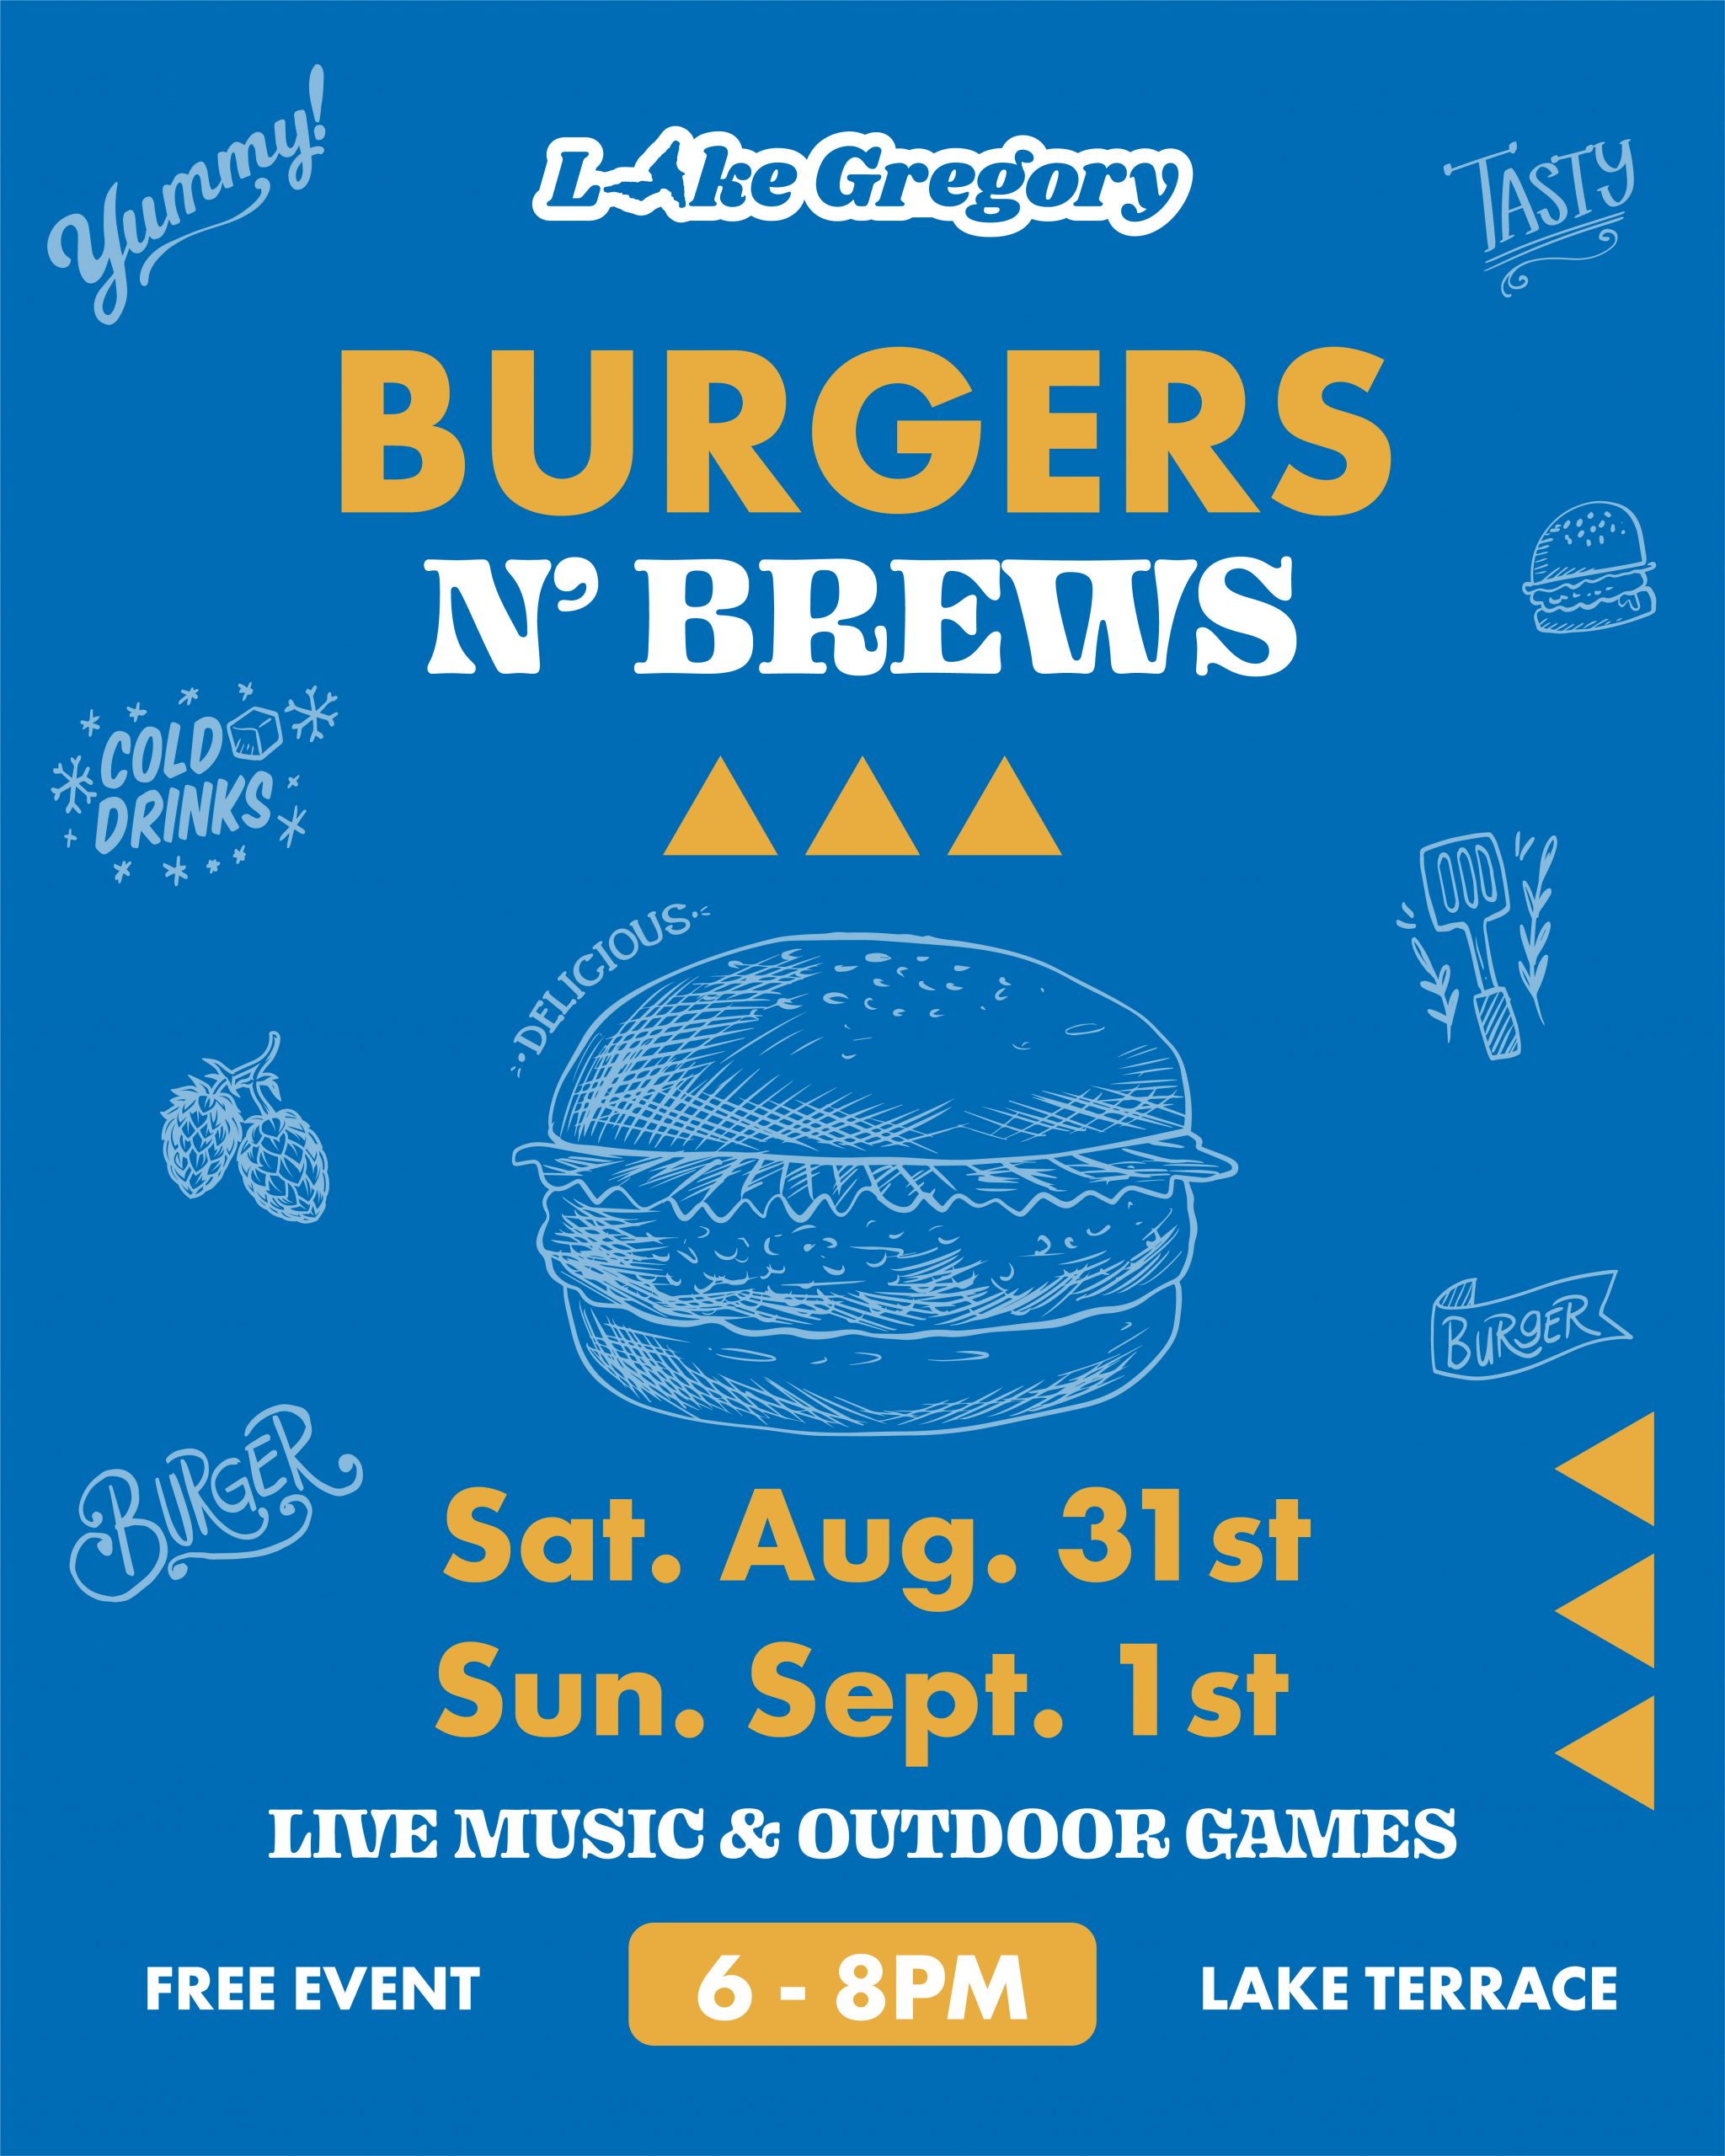 A graphic with an illustration of a hamburger advertising the Burger s N' Brews event at Lake Gregory Saturday August 31 and Sunday September 1 from 6 to 8 p.m.